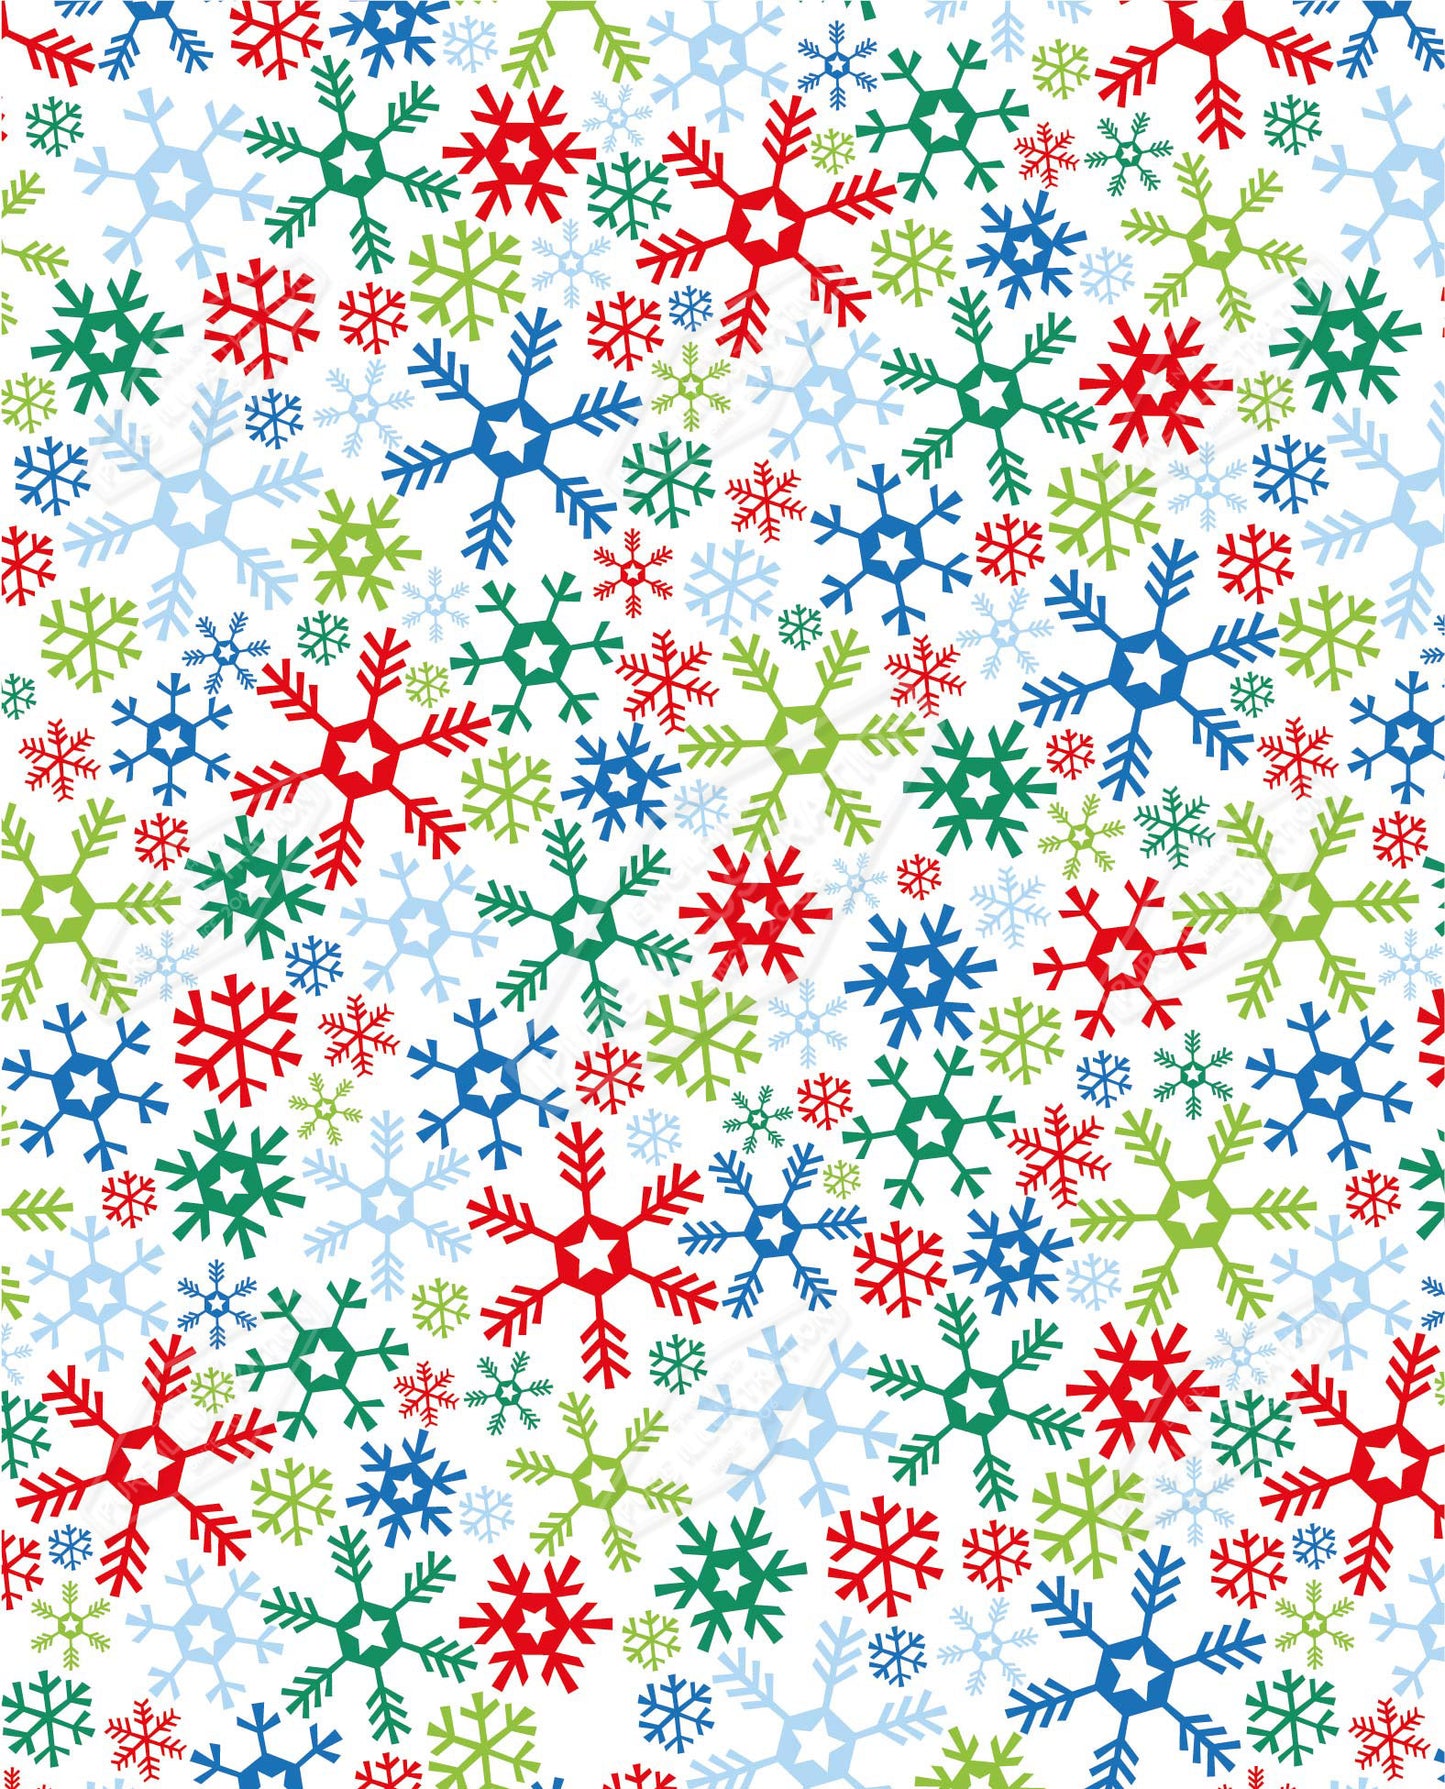 00035255SPI- Sarah Pitt is represented by Pure Art Licensing Agency - Christmas Pattern Design